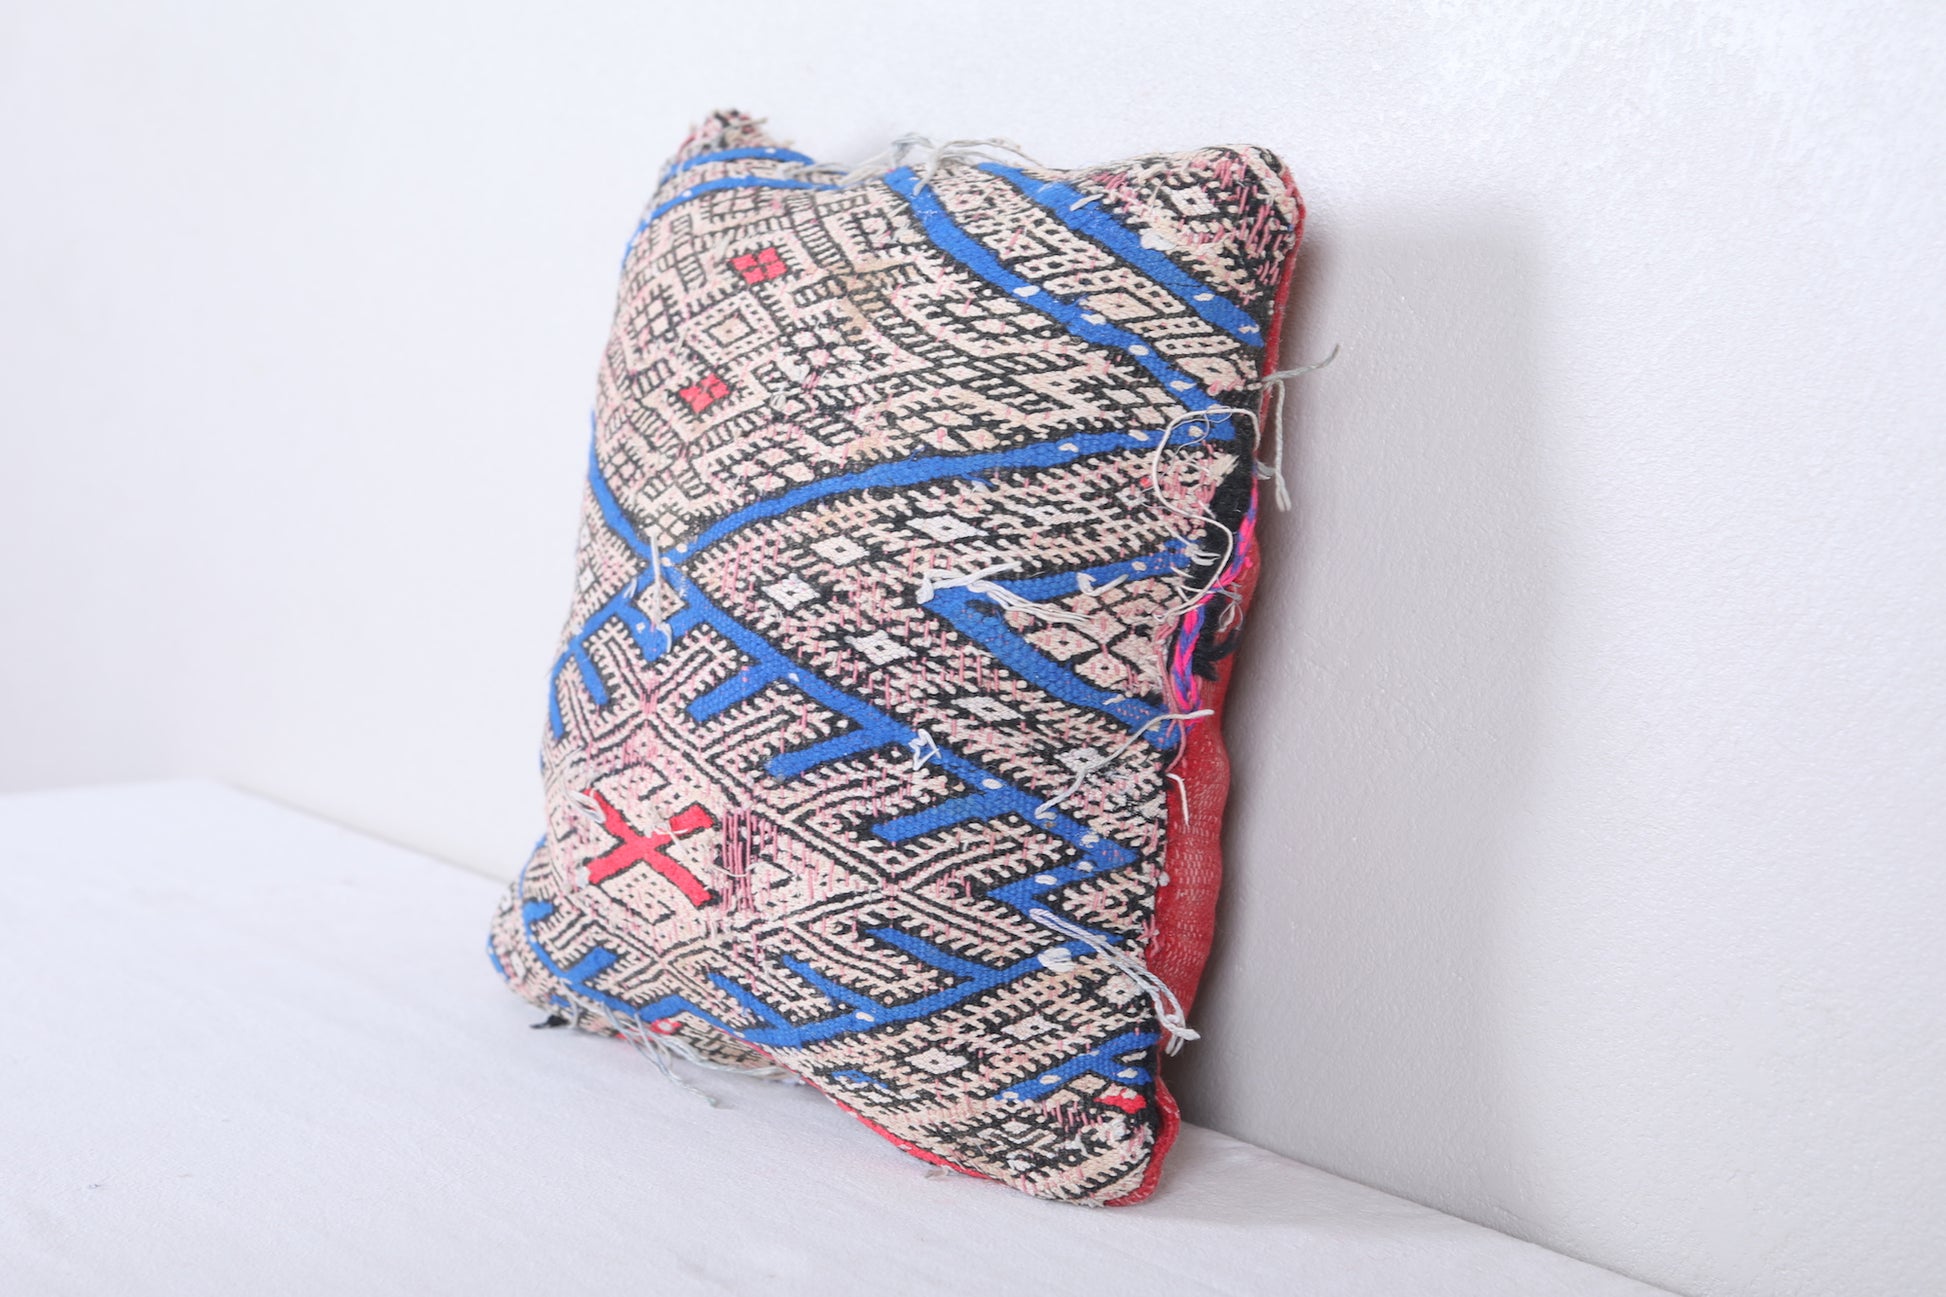 Vintage handmade moroccan kilim pillow 14.1 INCHES X 15.7 INCHES